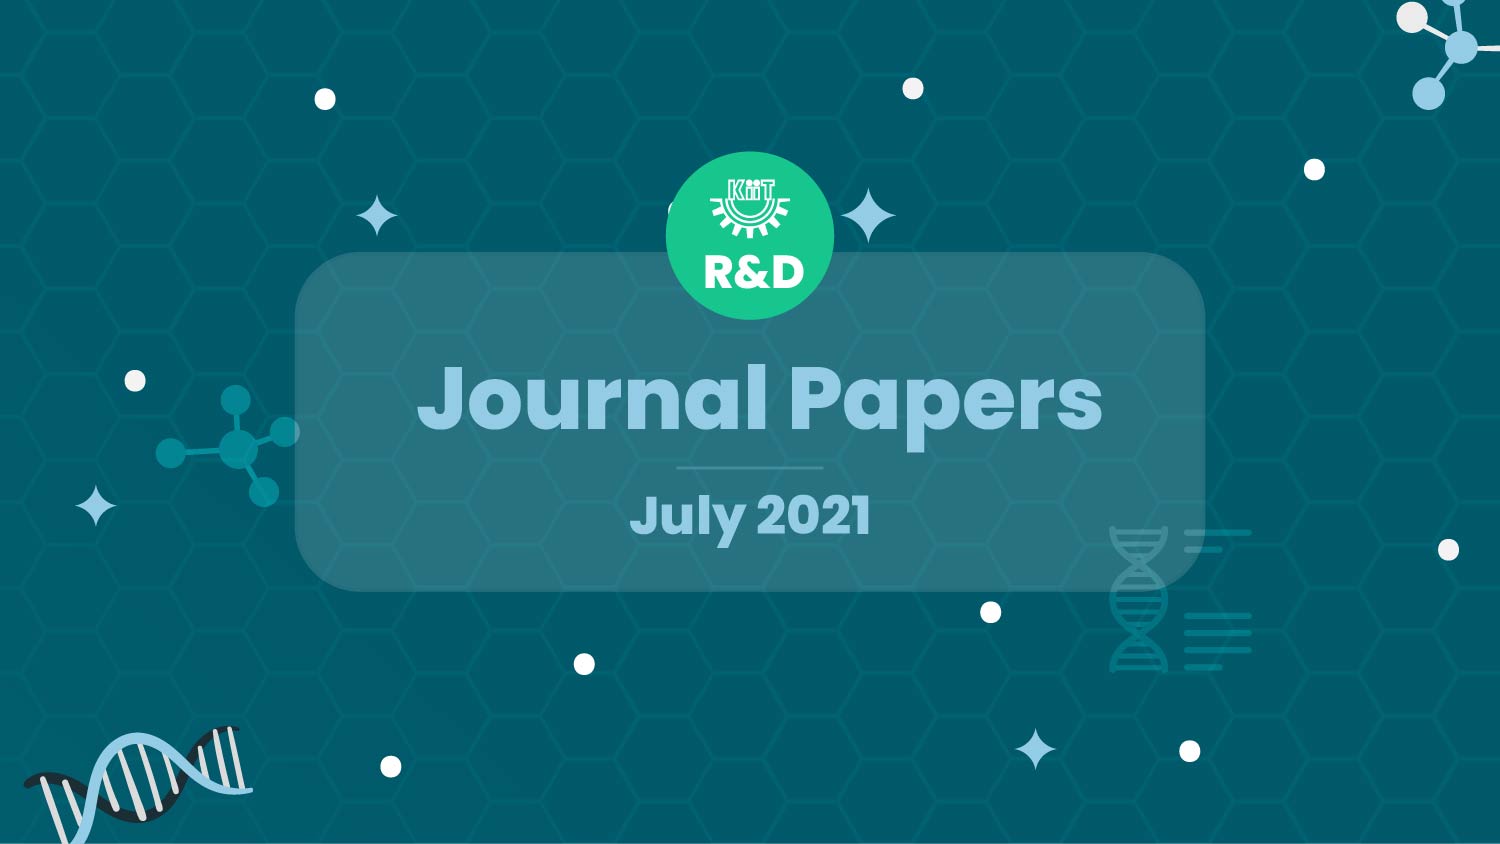 KIIT R&D Research and Development-Journal Papers